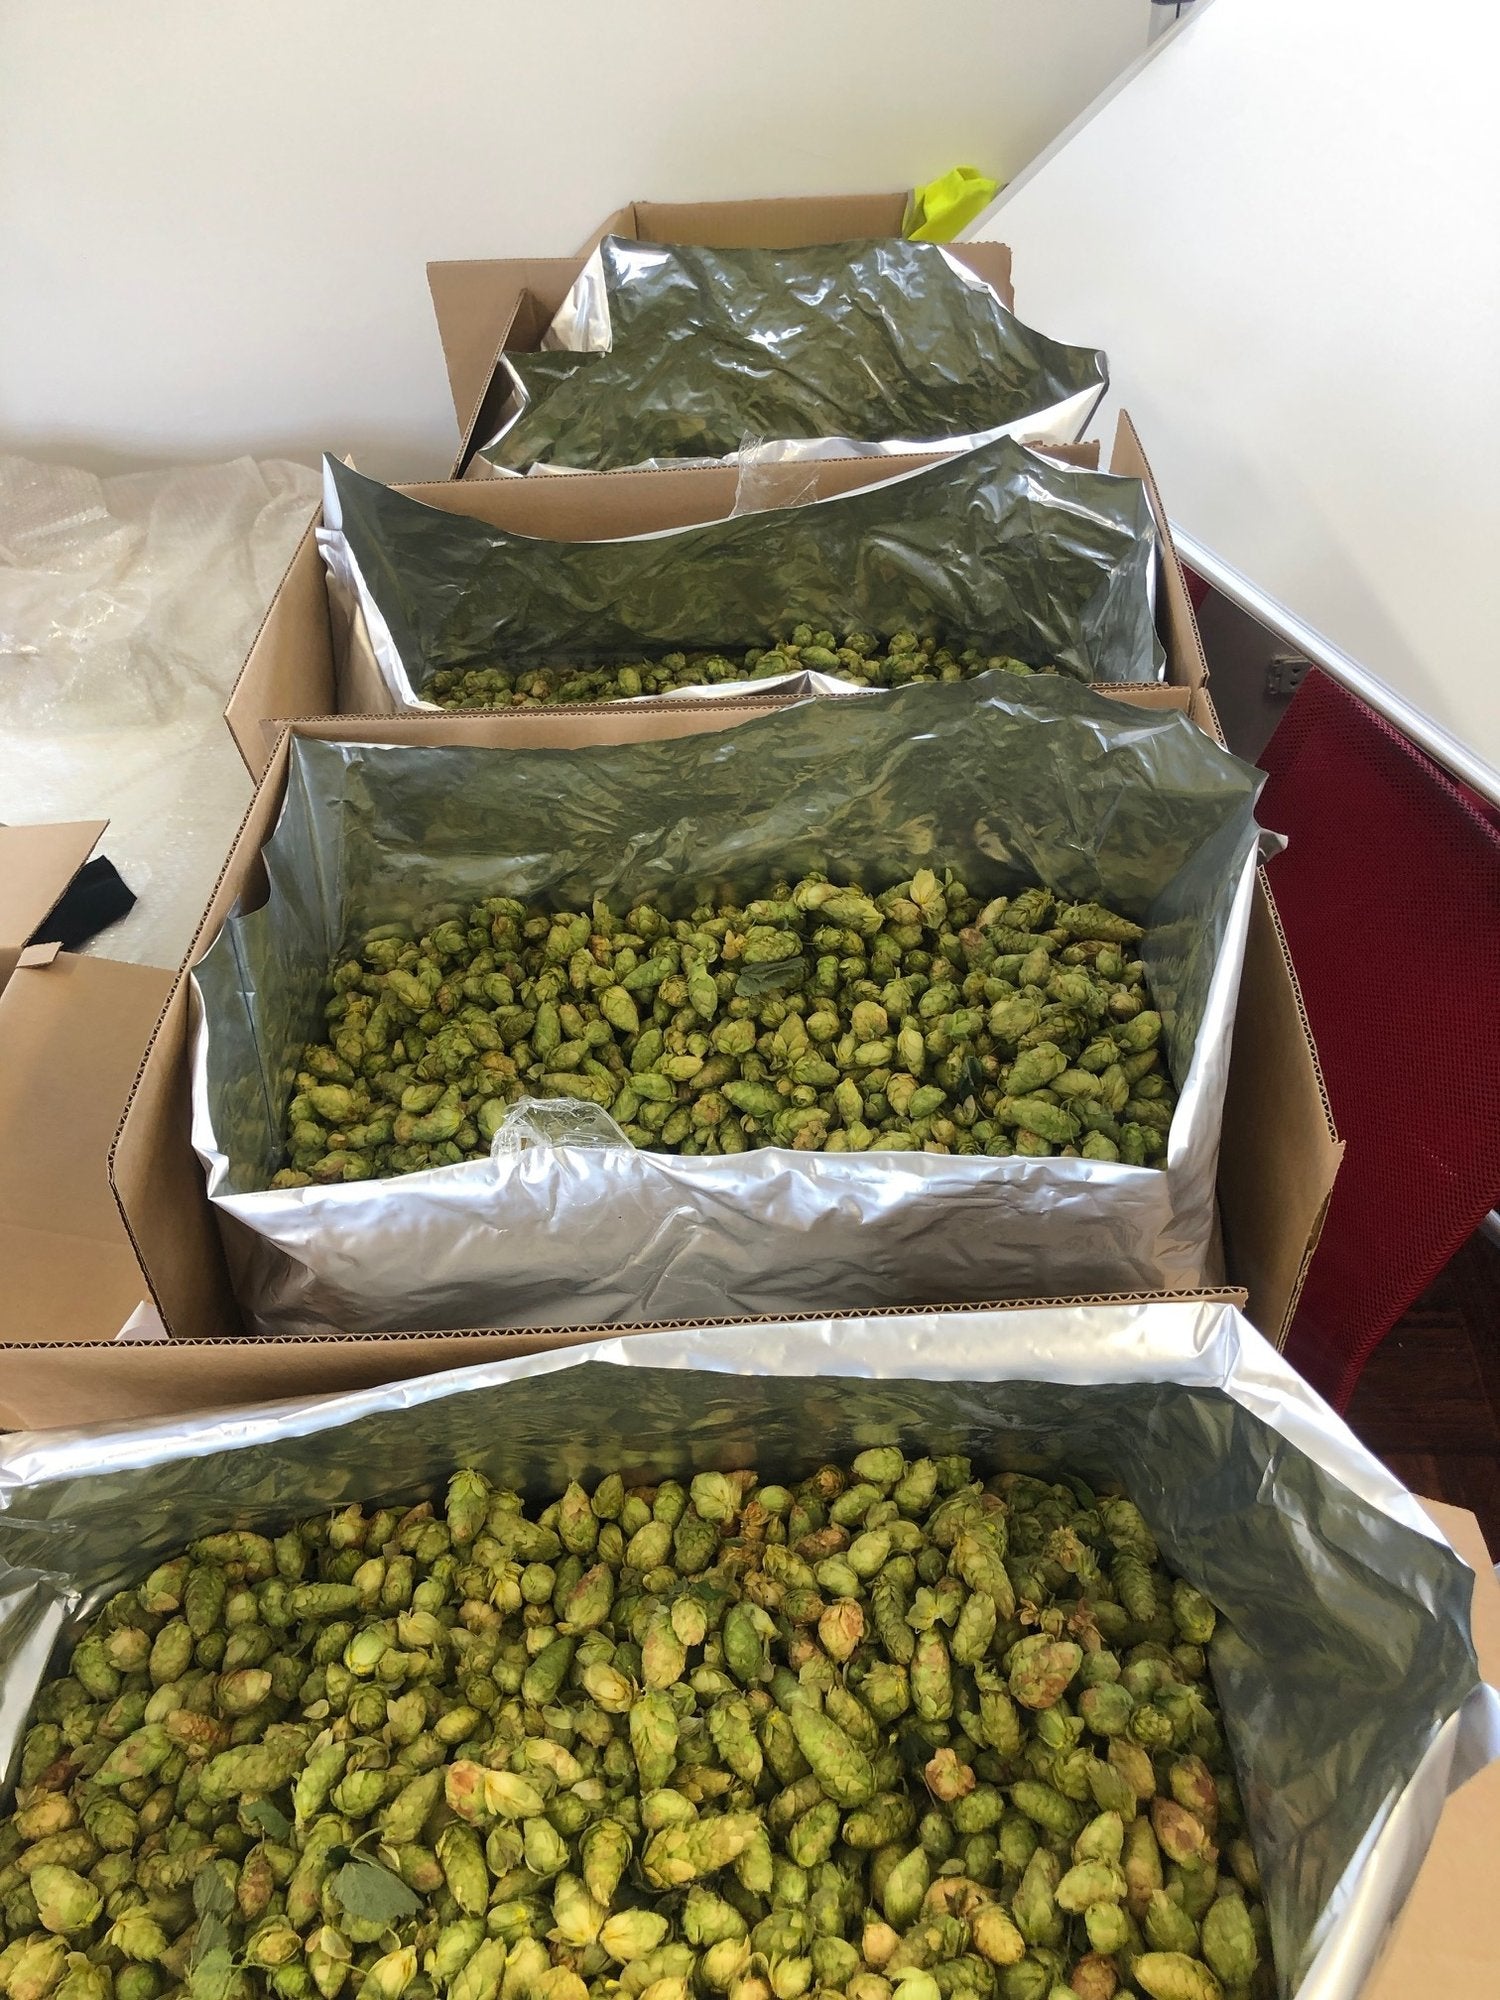 HERE COMES THE HOP HARVEST